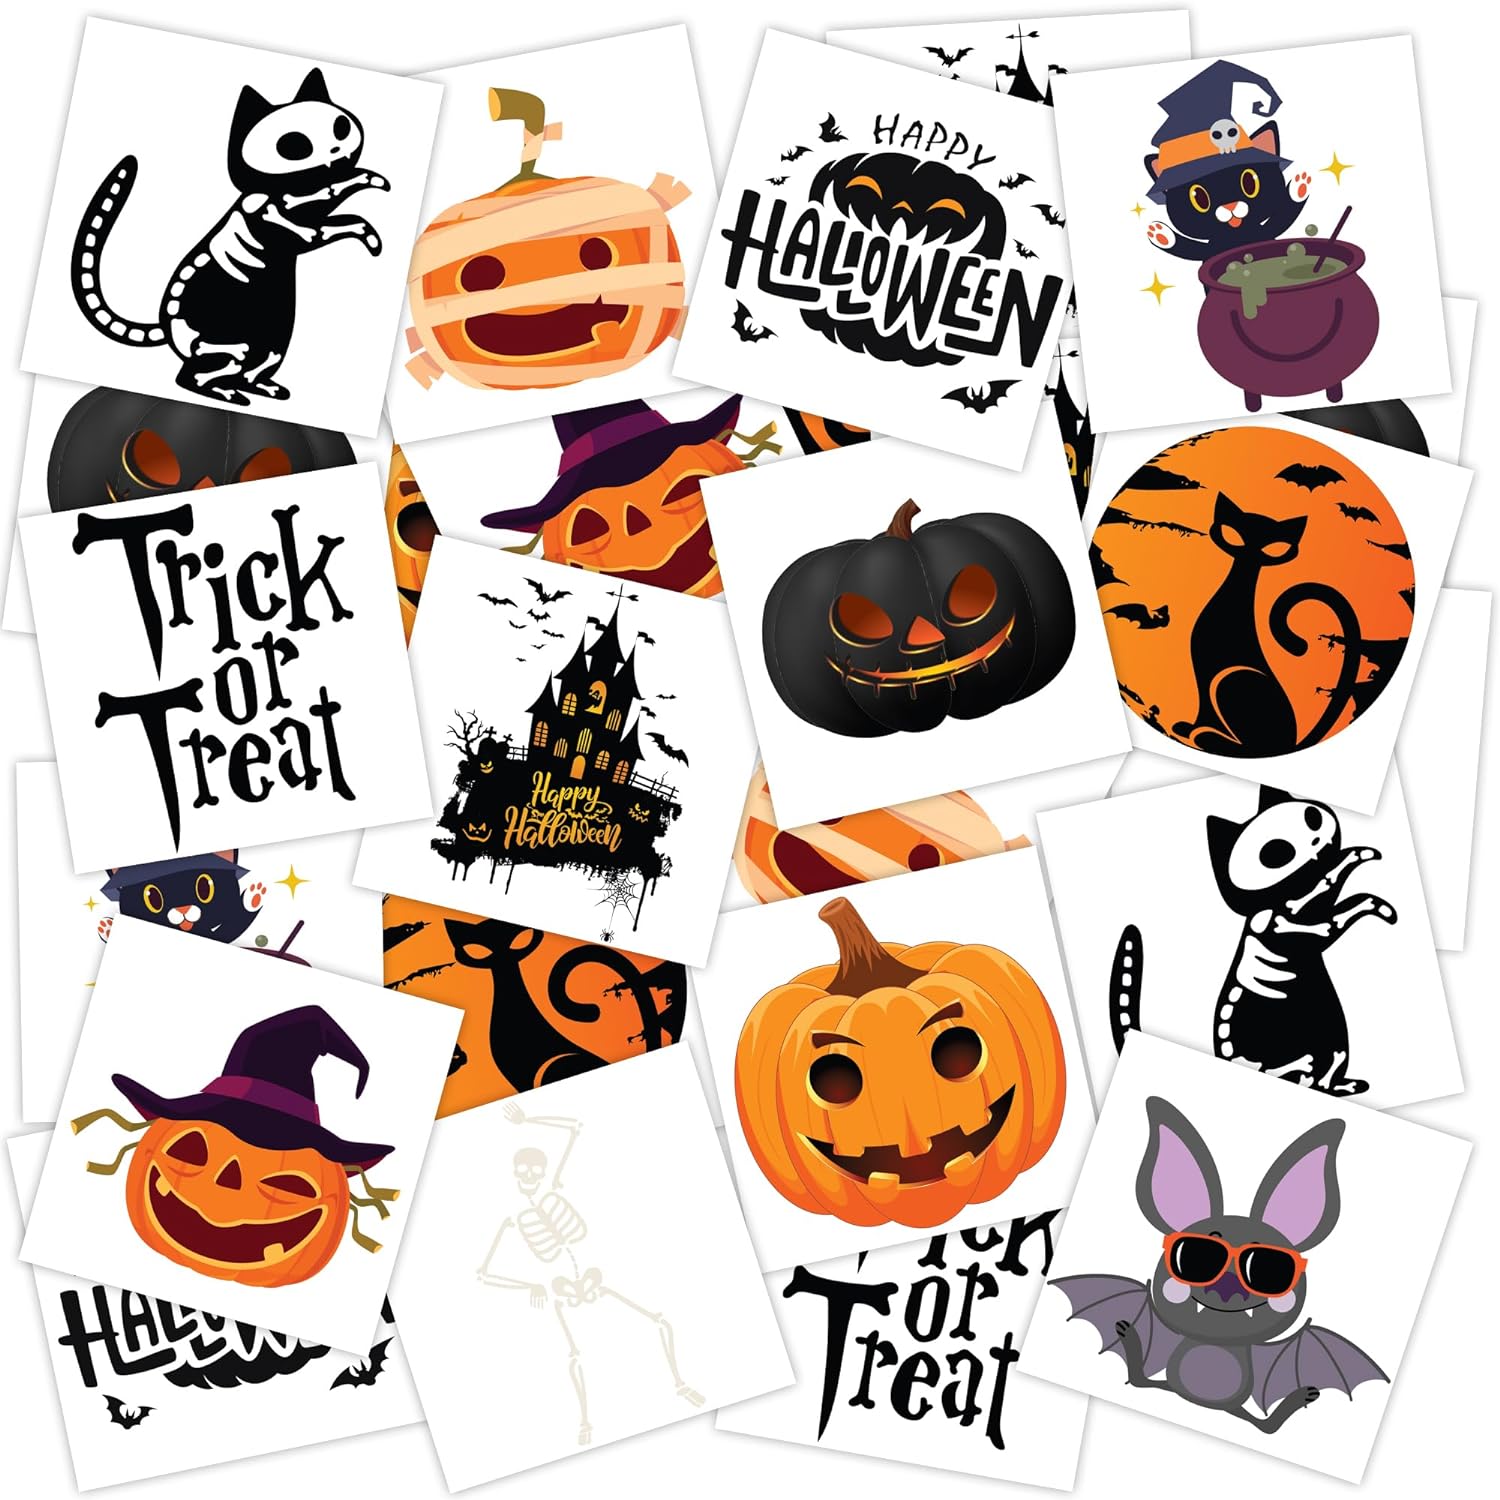 Halloween Glow in the Dark Temporary Tattoos, Set of 144, Temporary Tats for Kids in 12 Spooky Designs, Easy to Apply & Remove